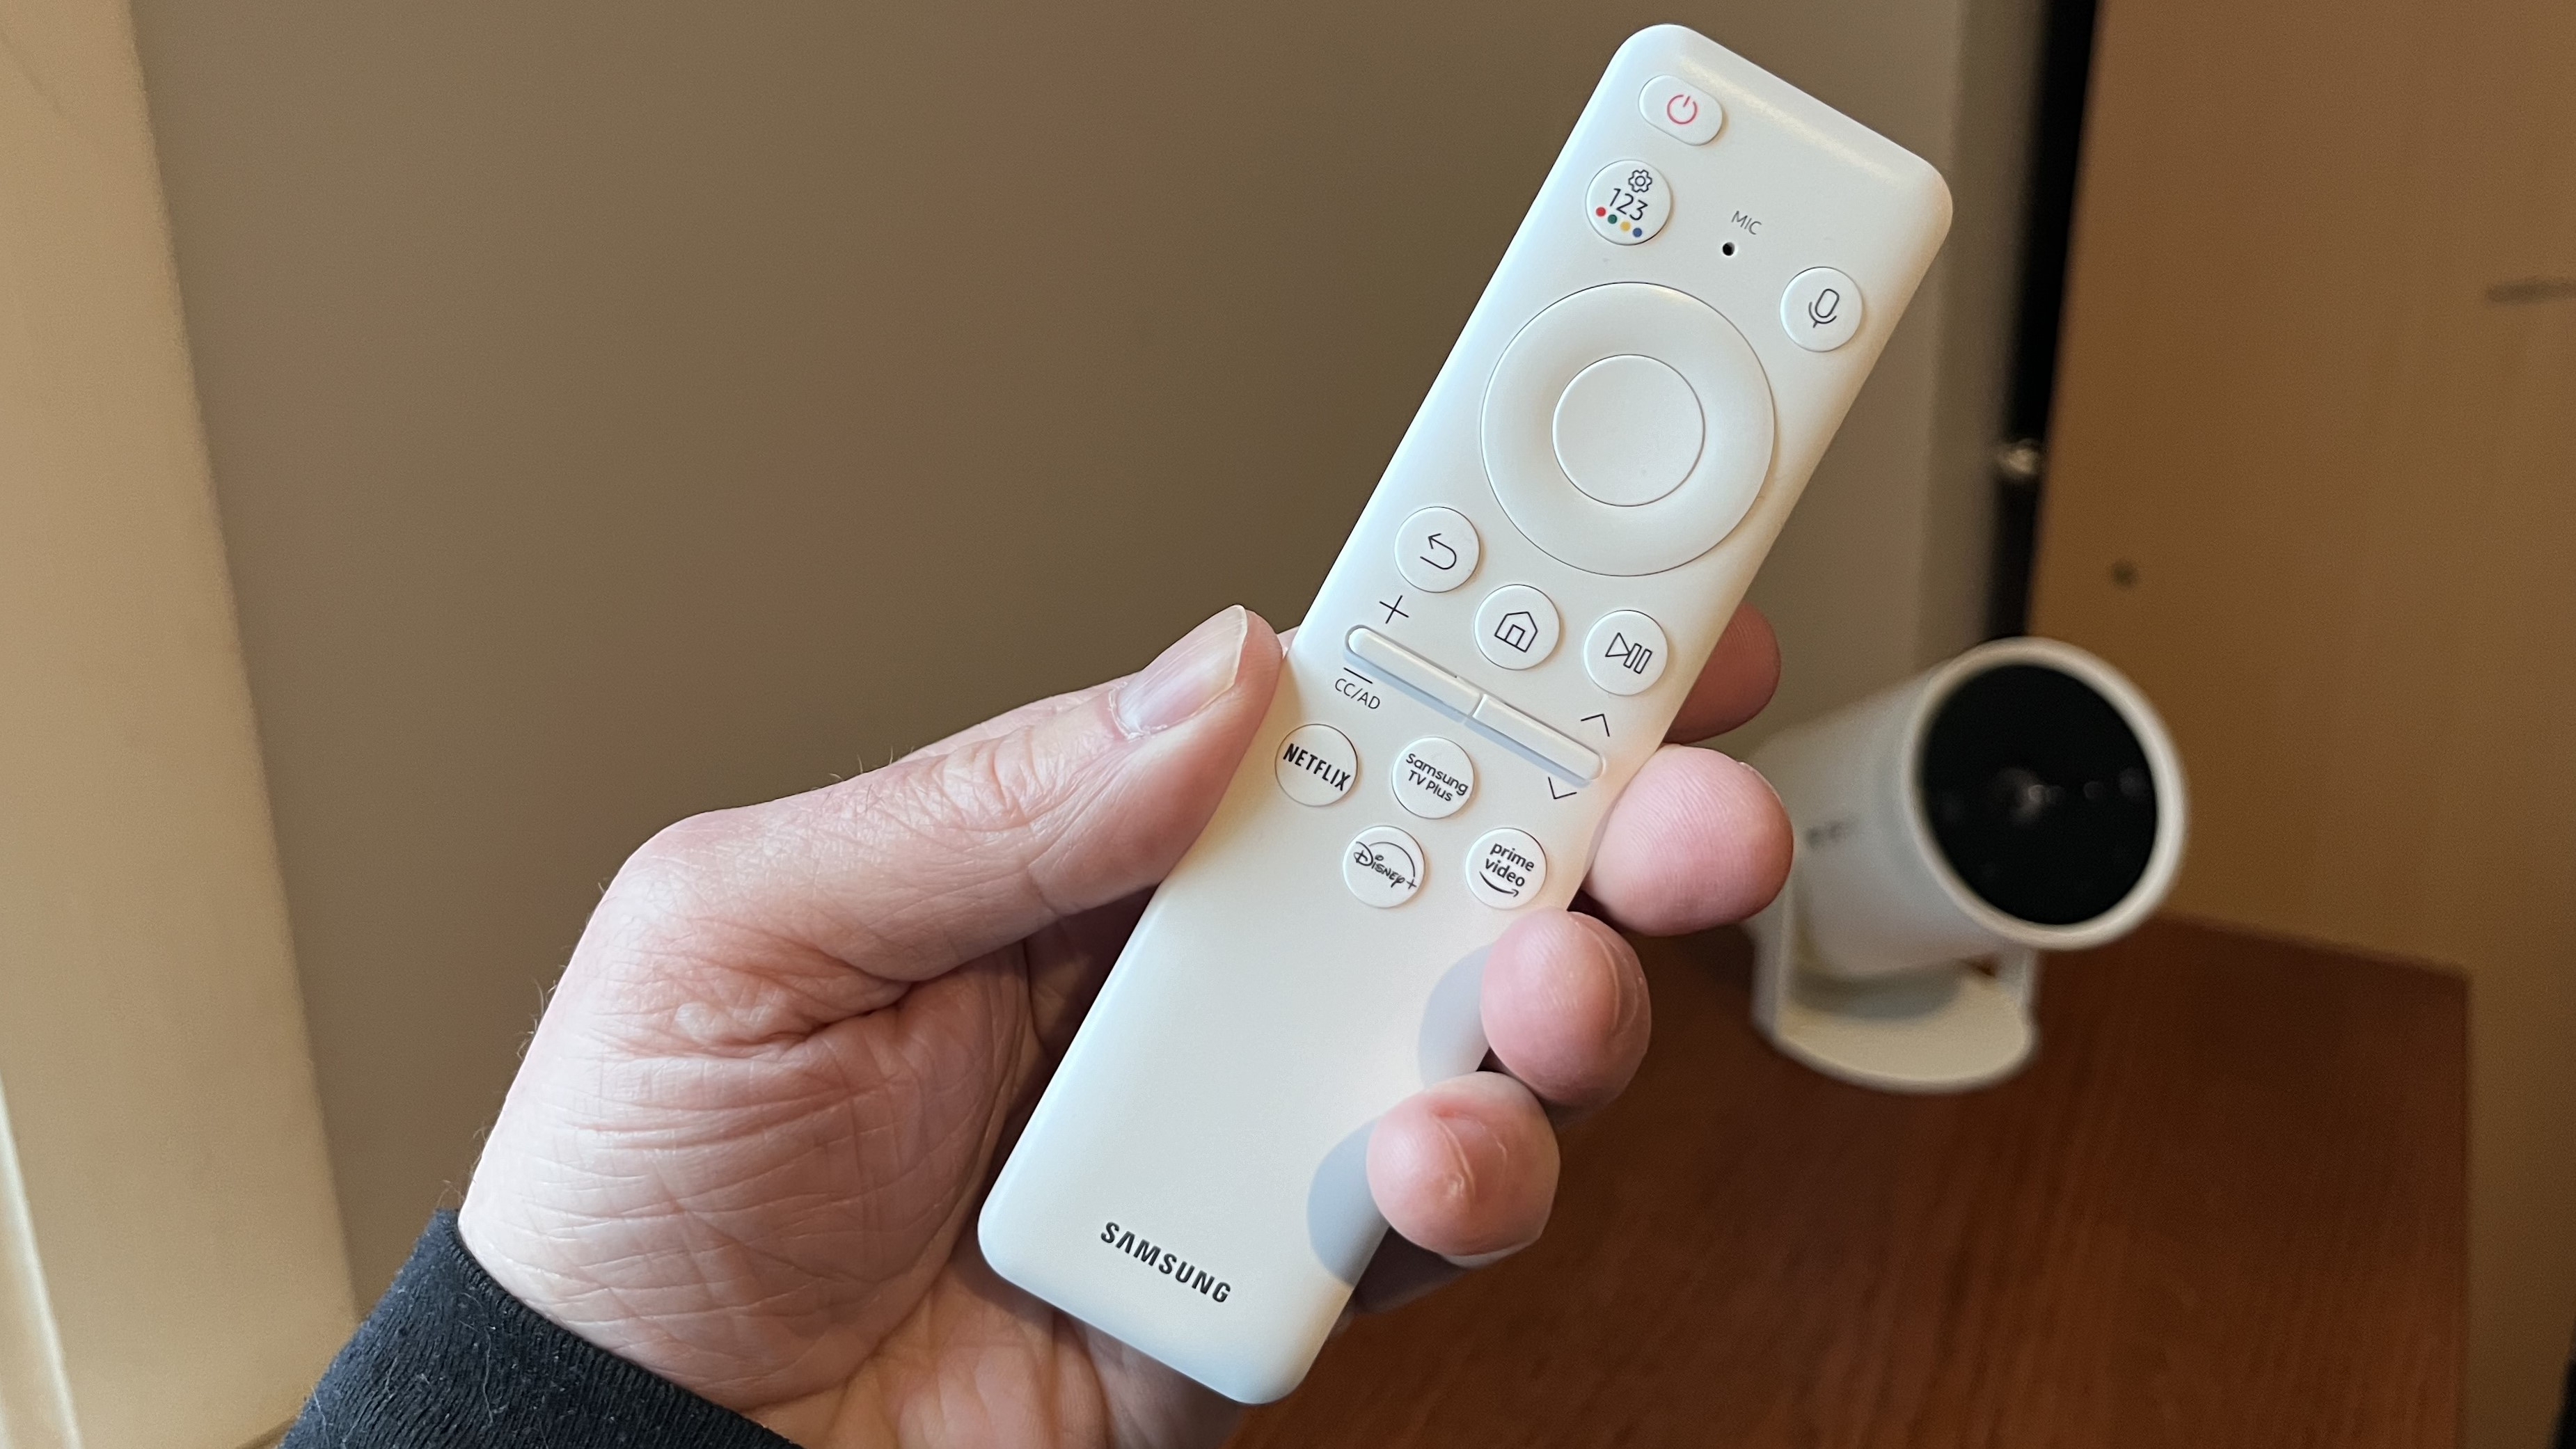 Samsung The Freestyle 2nd Gen remote control held in hand